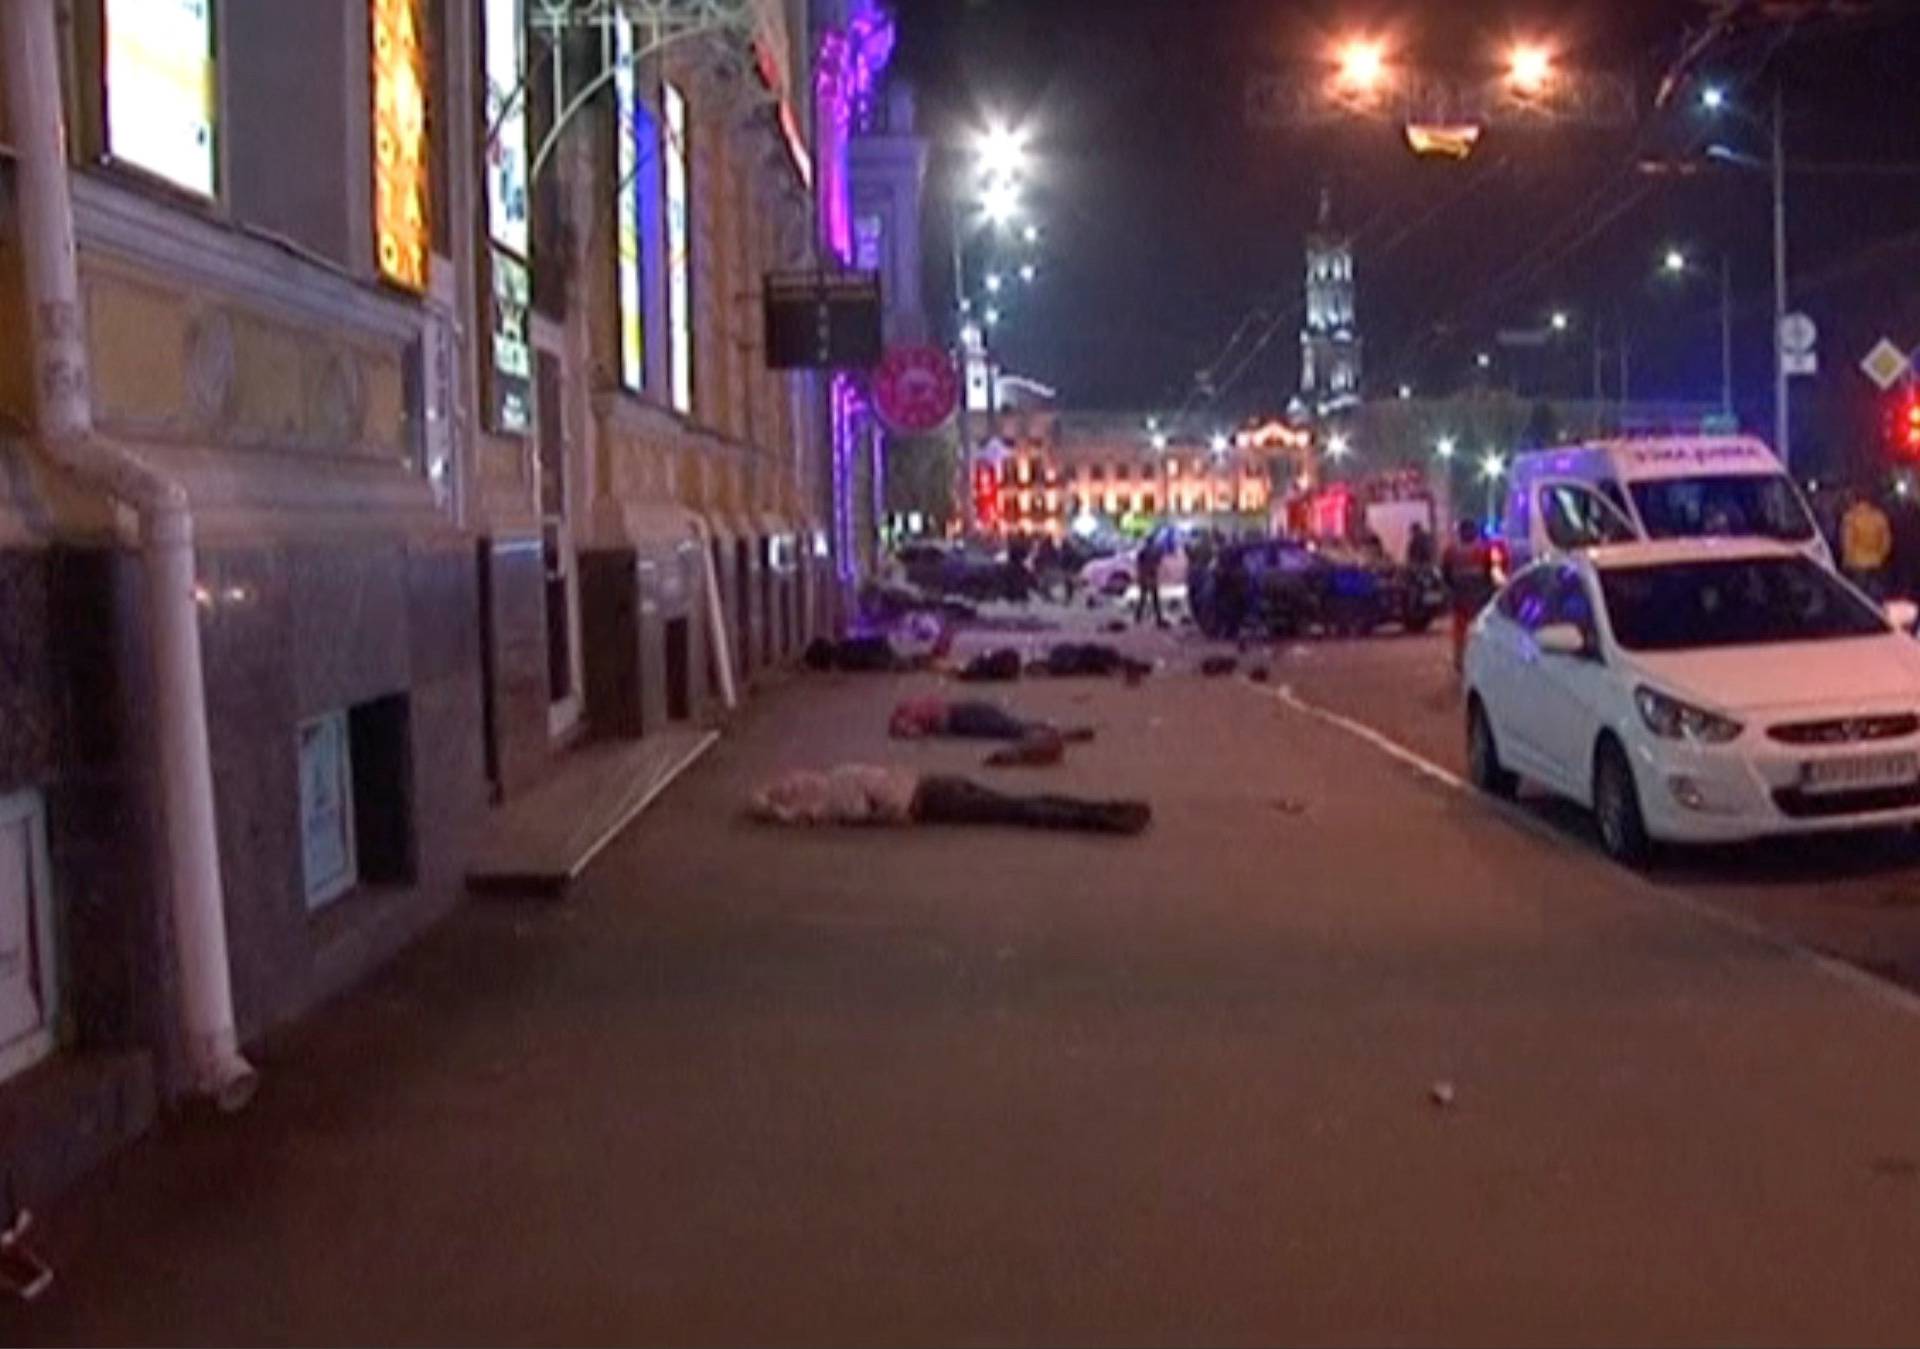 A still image taken from a video shot on October 18, 2017, shows police working at the accident scene after a car drove into pedestrians following a vehicle collision in central Kharkiv